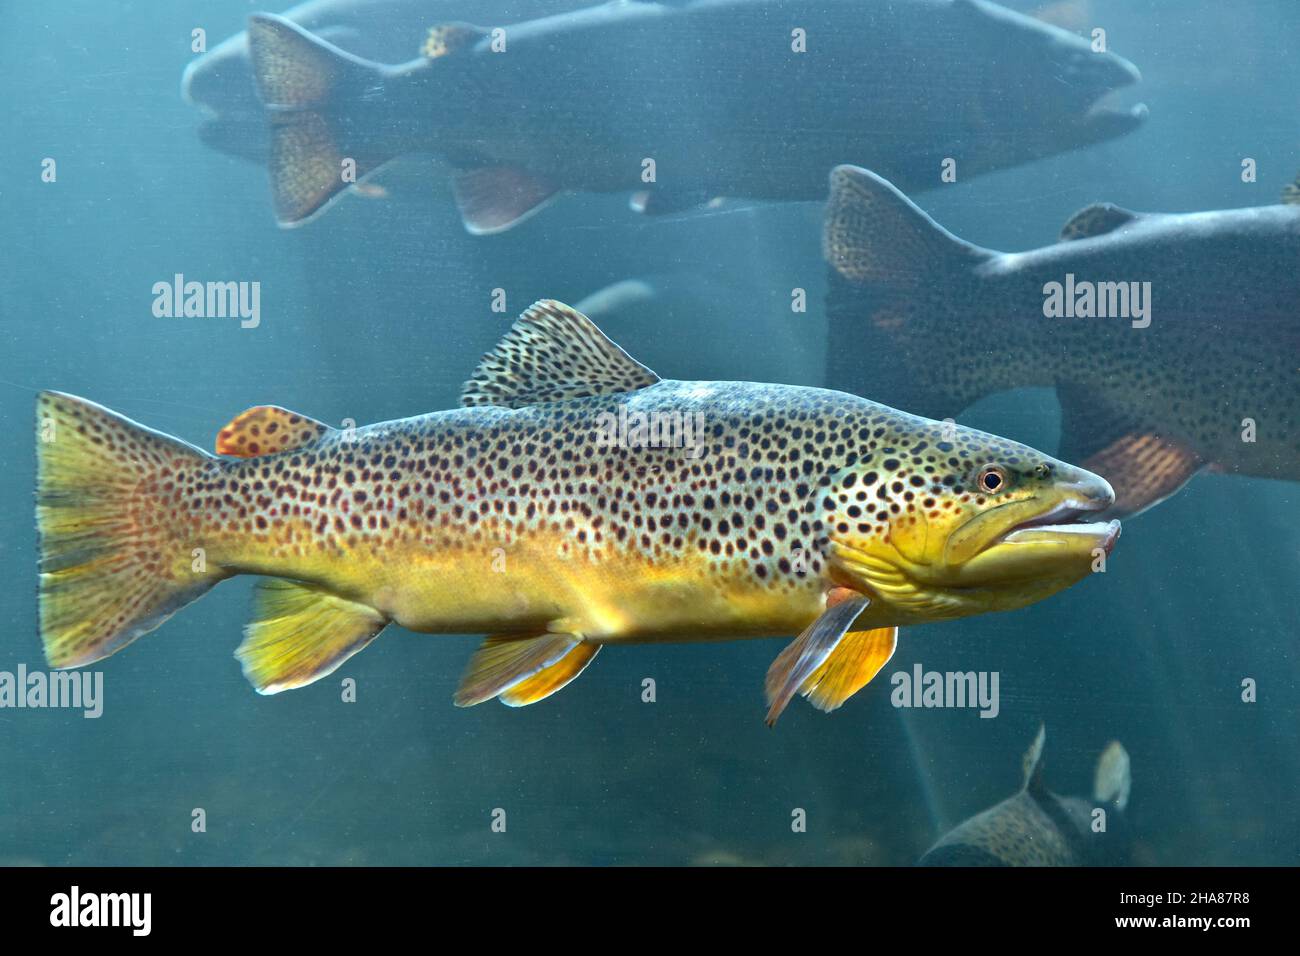 Brown Trout 'Salmo Trutta', Shepherd of the Hills Fish Hatchery, Conservation Center. Stock Photo